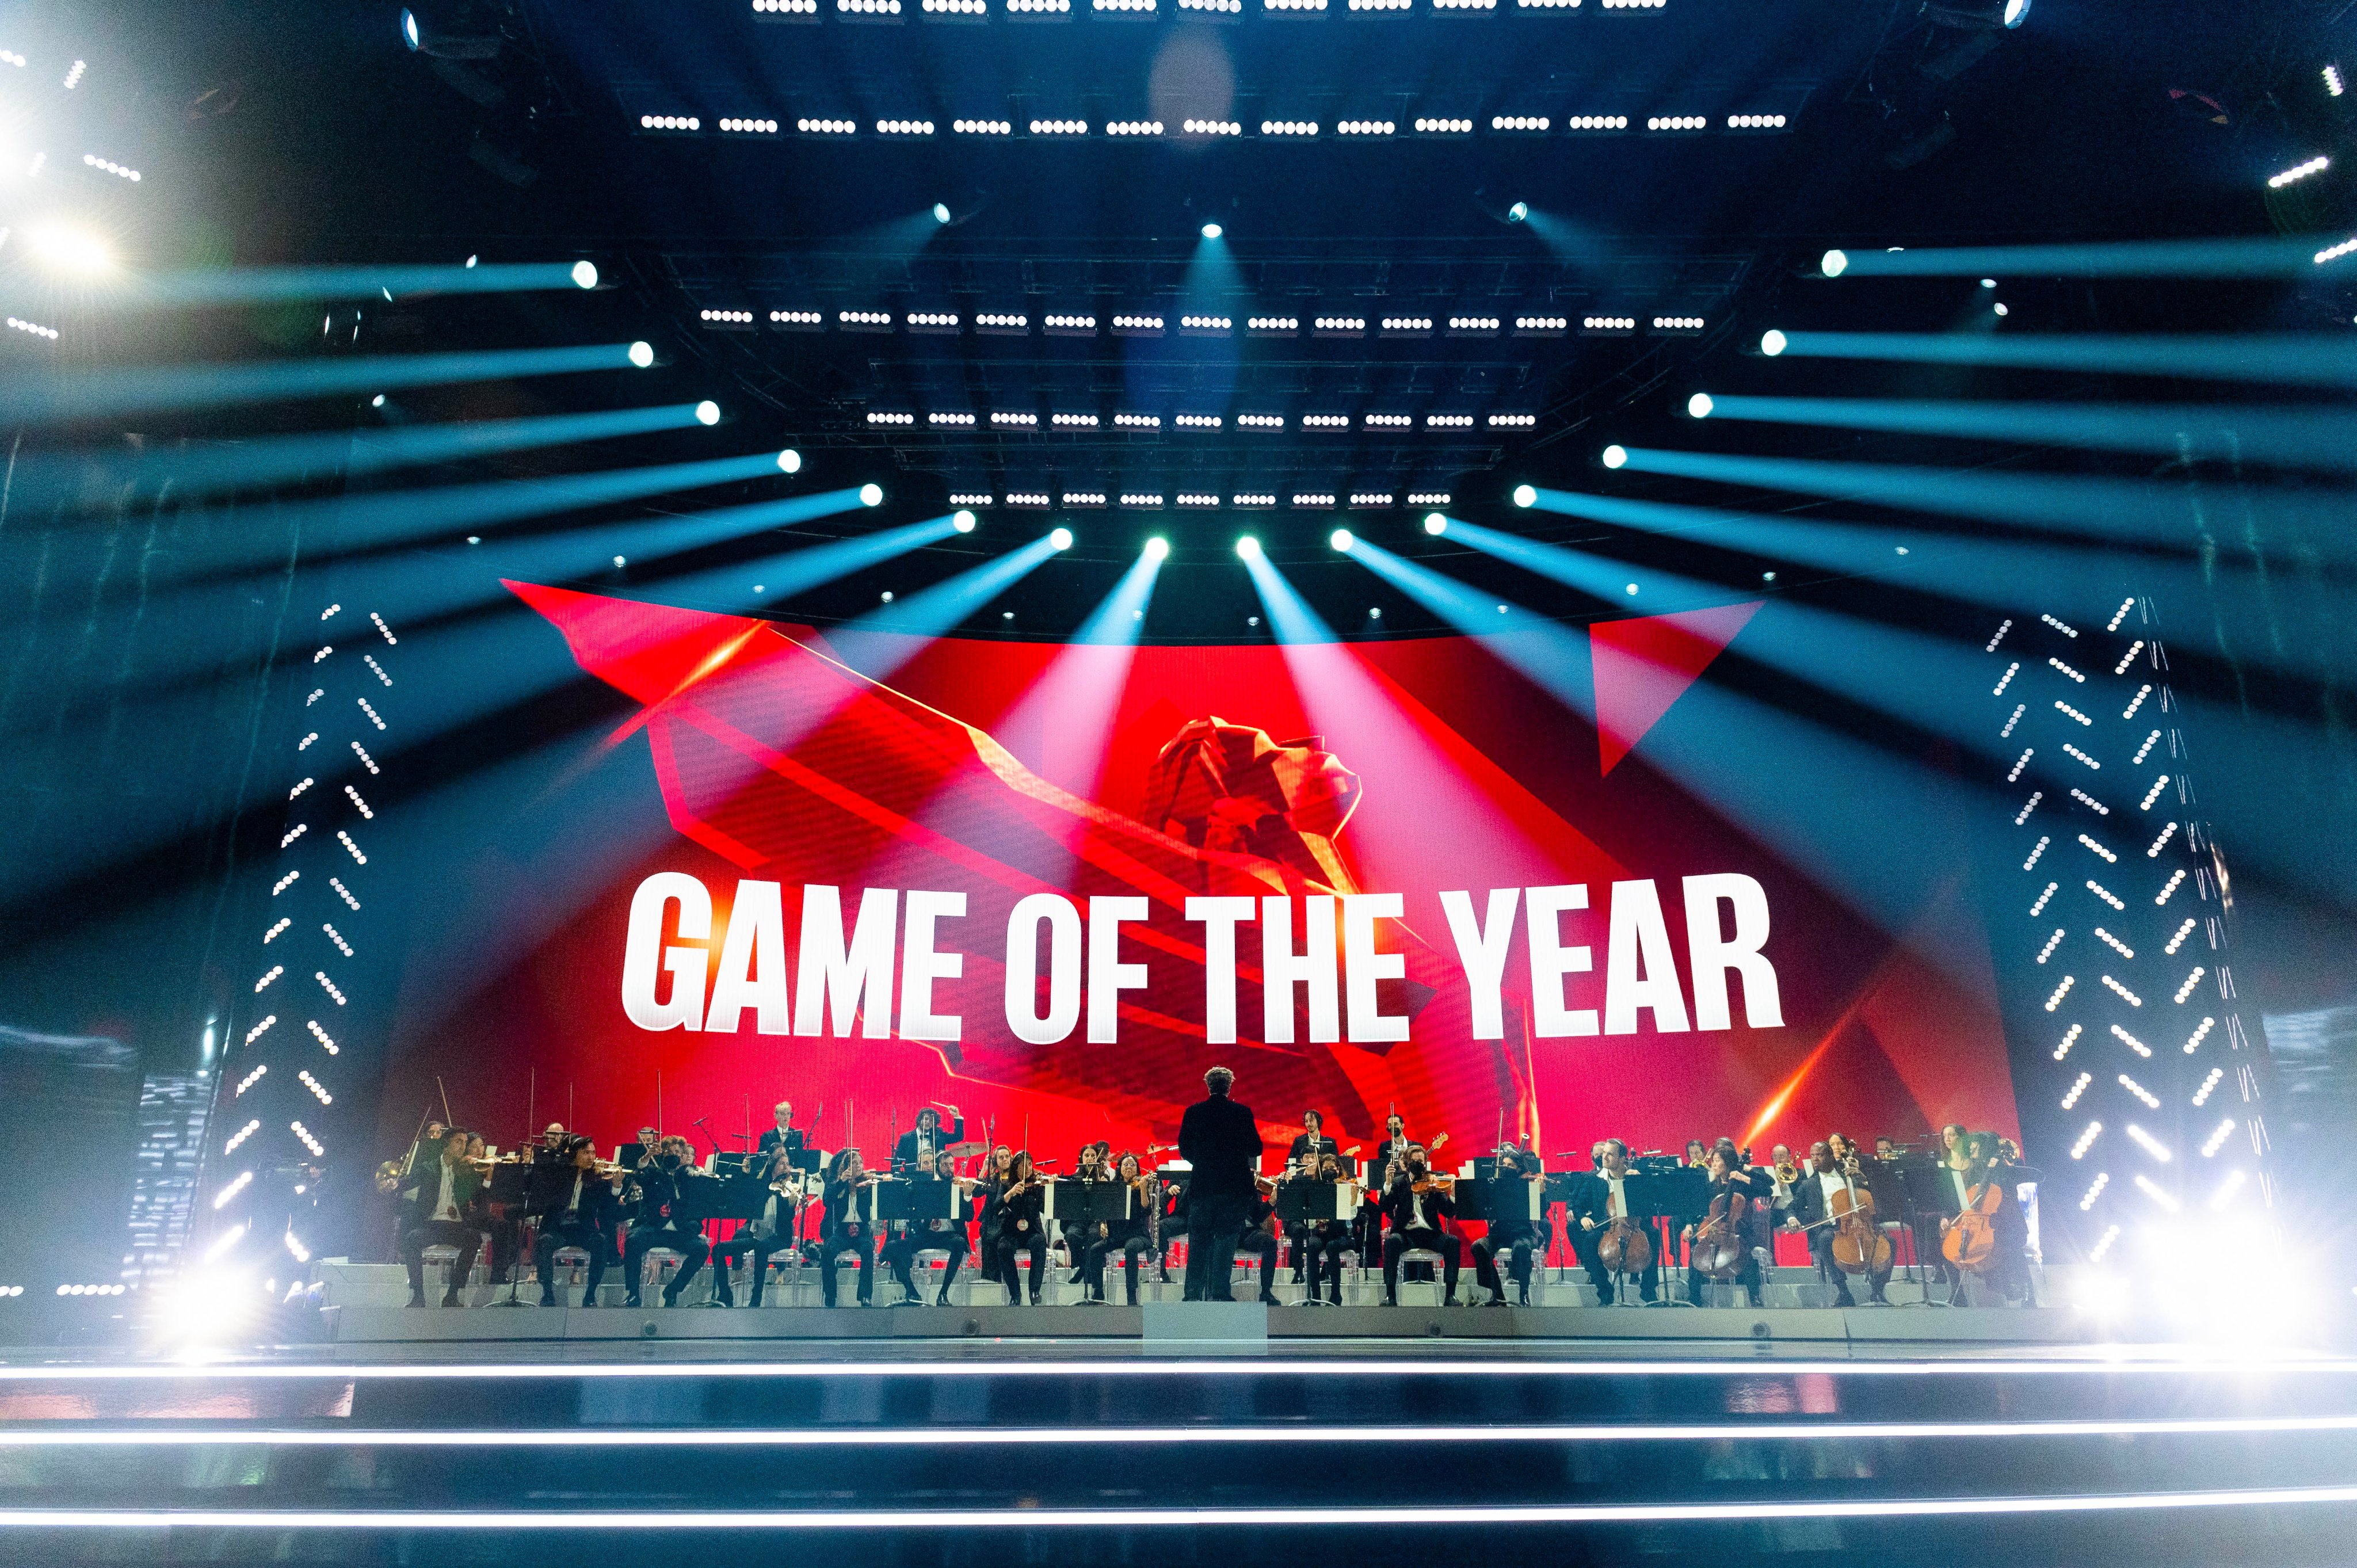 All Game of the year Award winners since 2015 